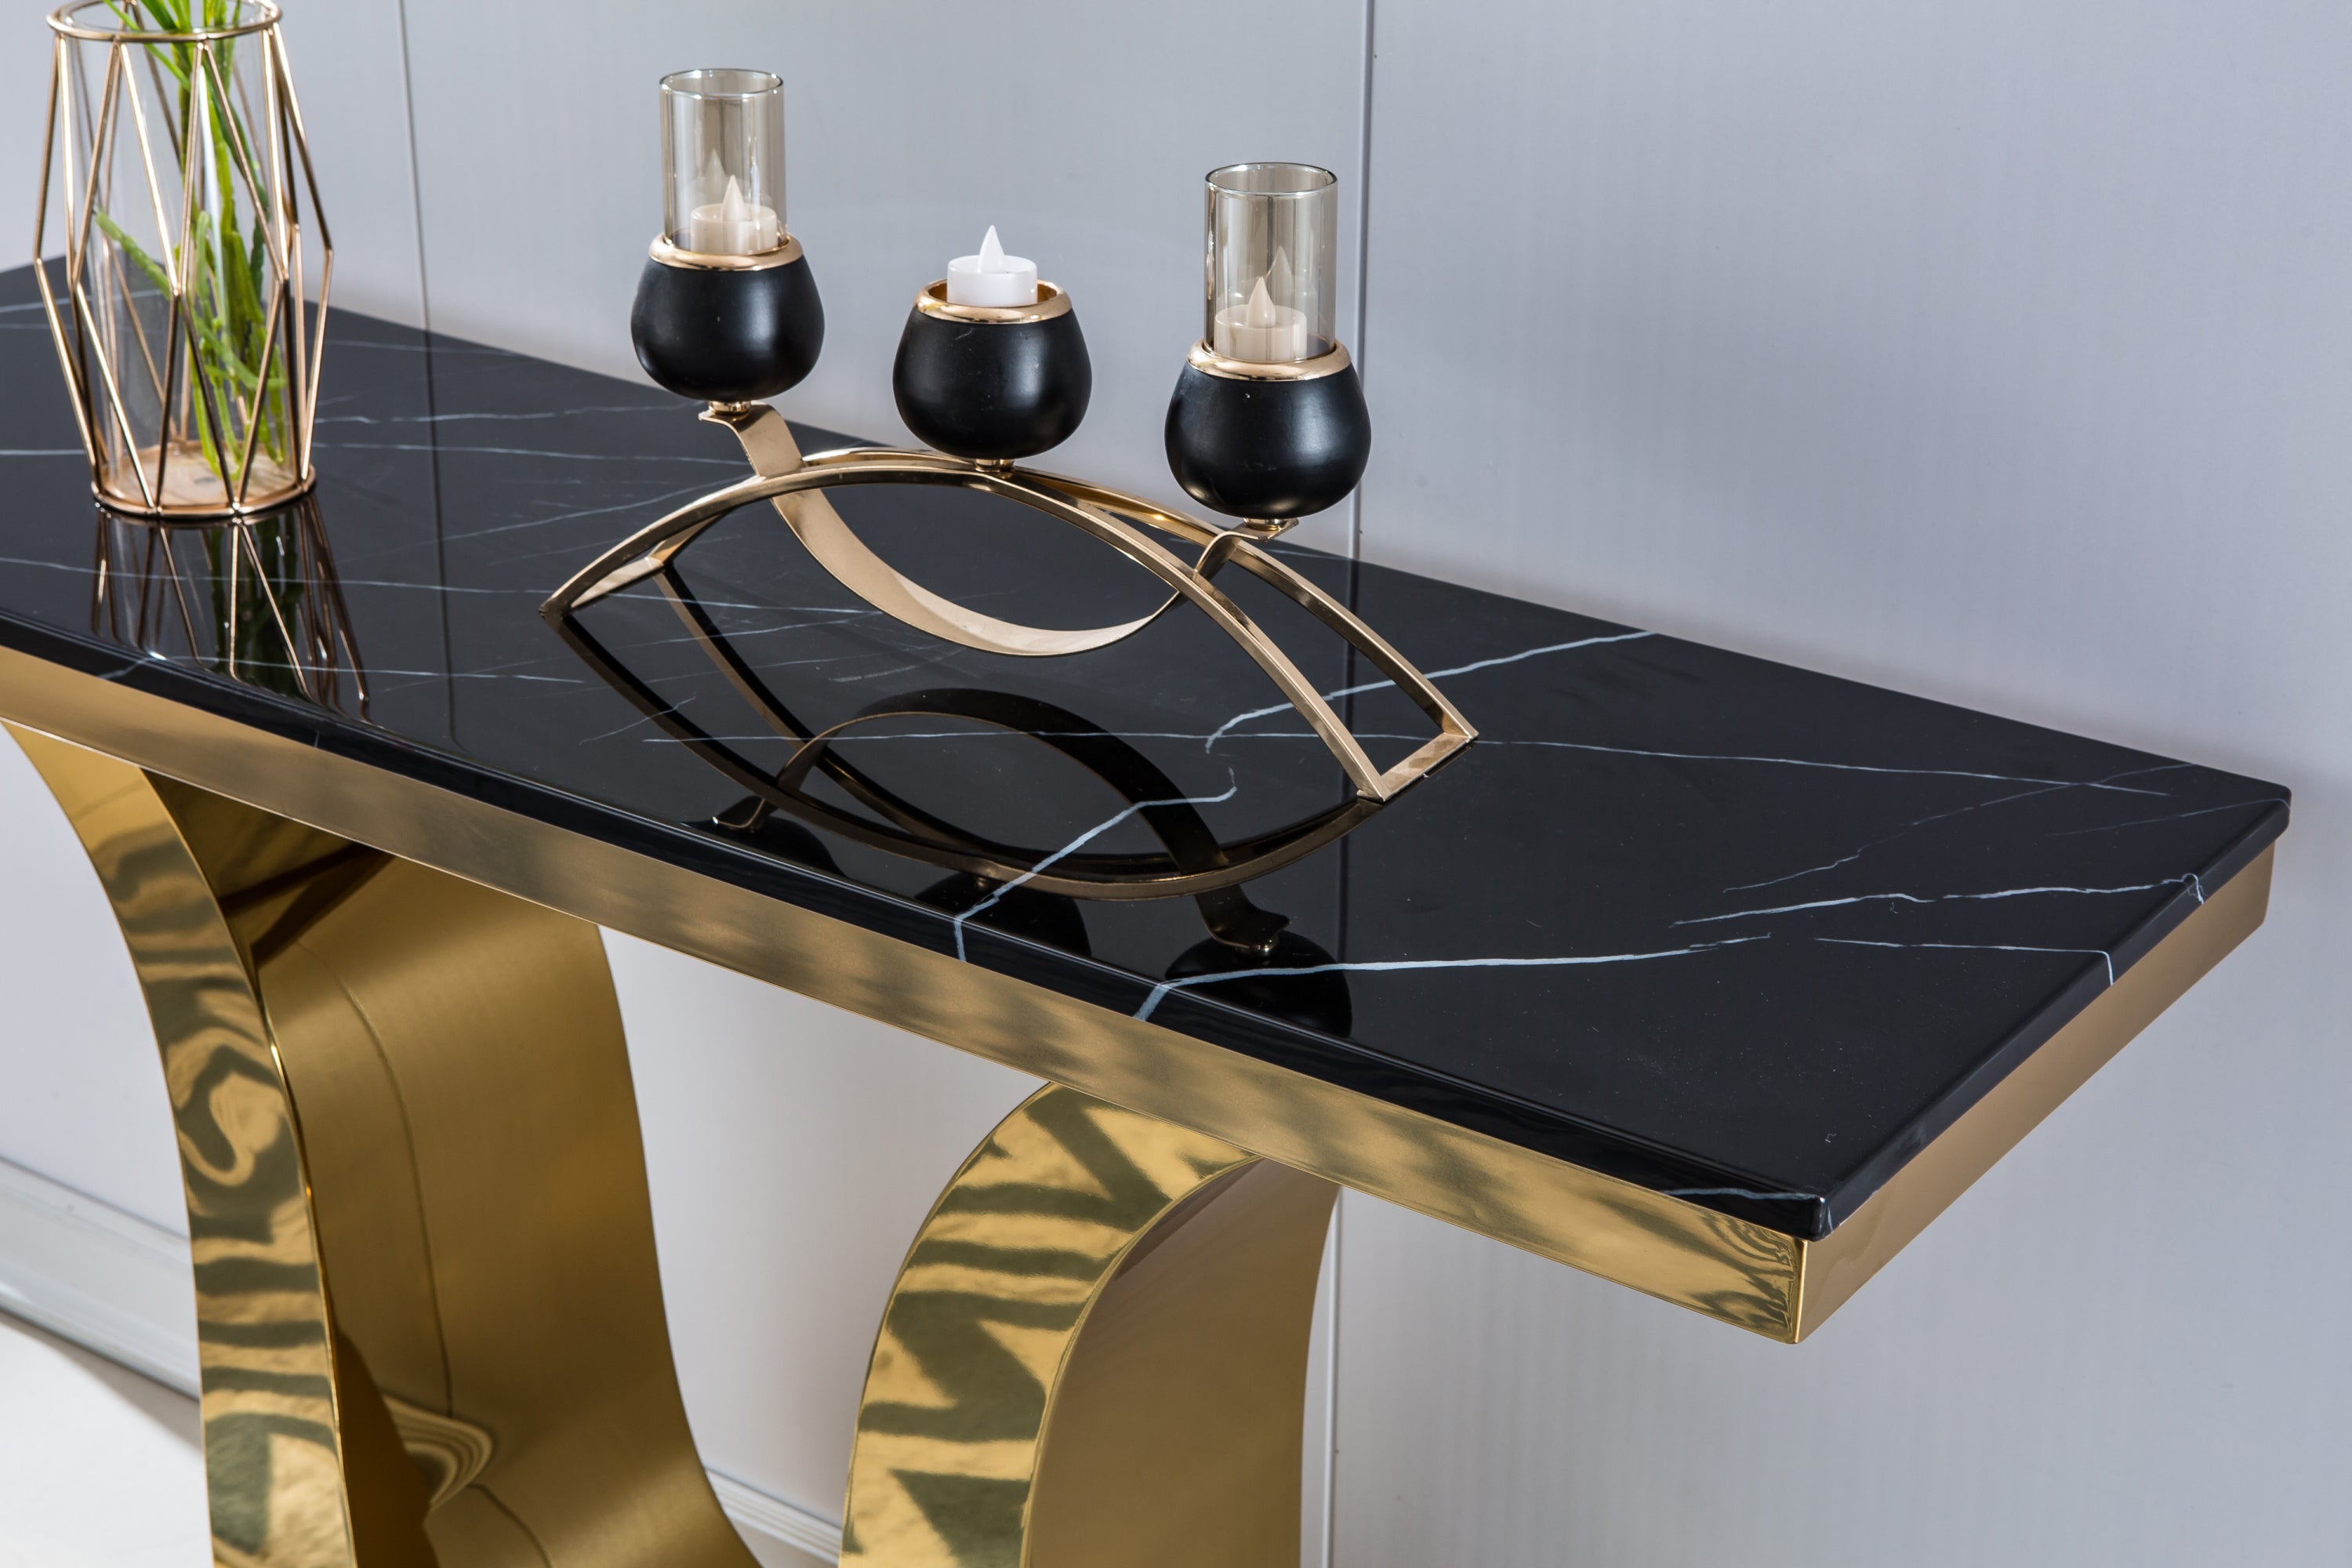 Modern Marble Console Table, 0.71" Thick Marble Top, U Shape Stainless Steel Base with Gold Finish